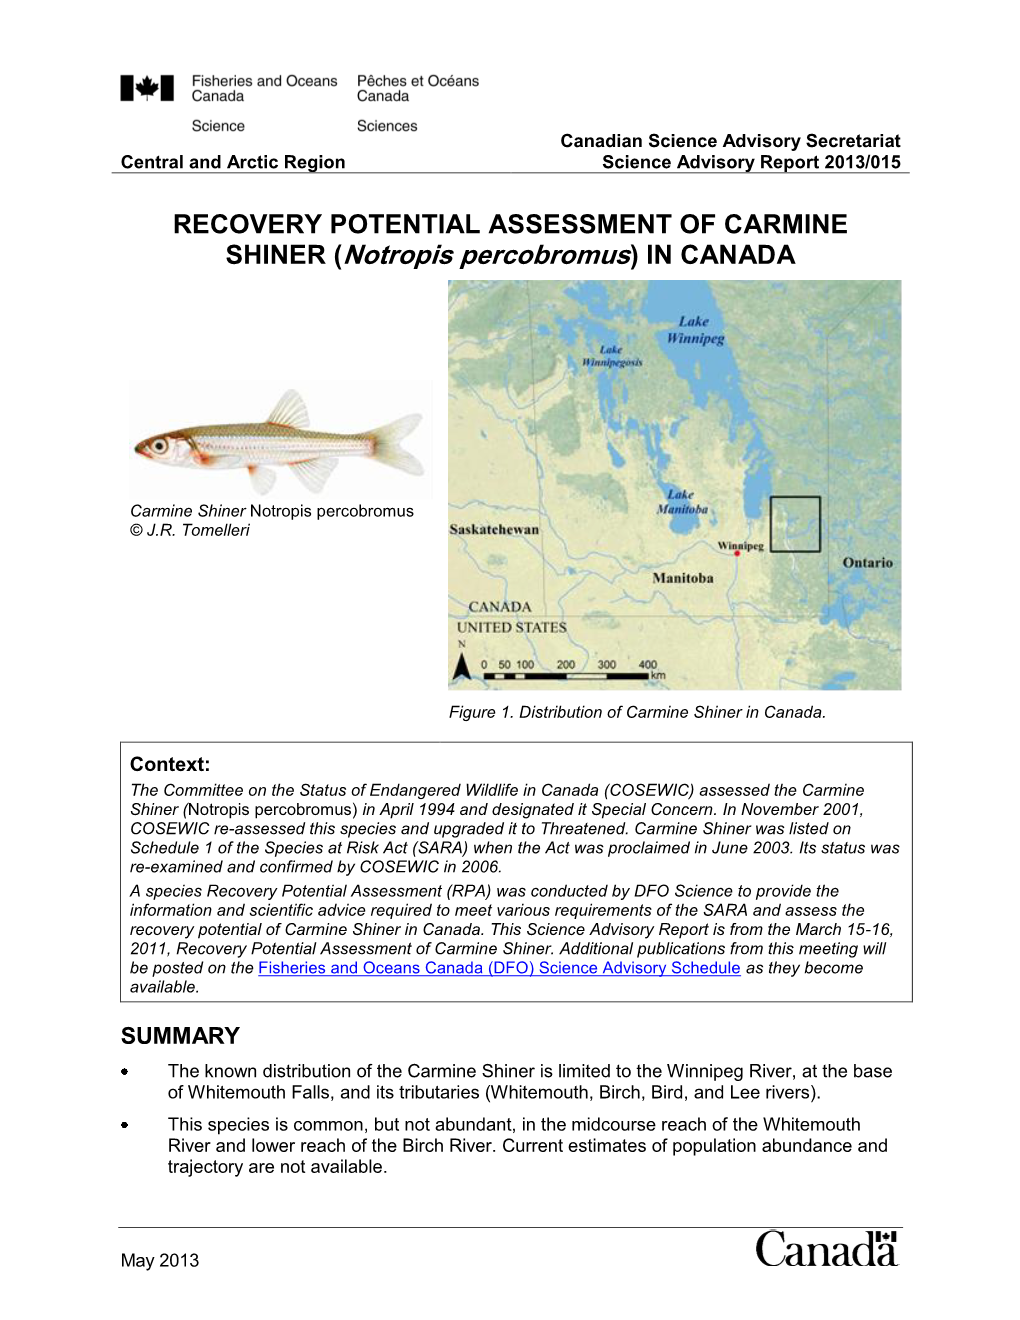 RECOVERY POTENTIAL ASSESSMENT of CARMINE SHINER (Notropis Percobromus) in CANADA